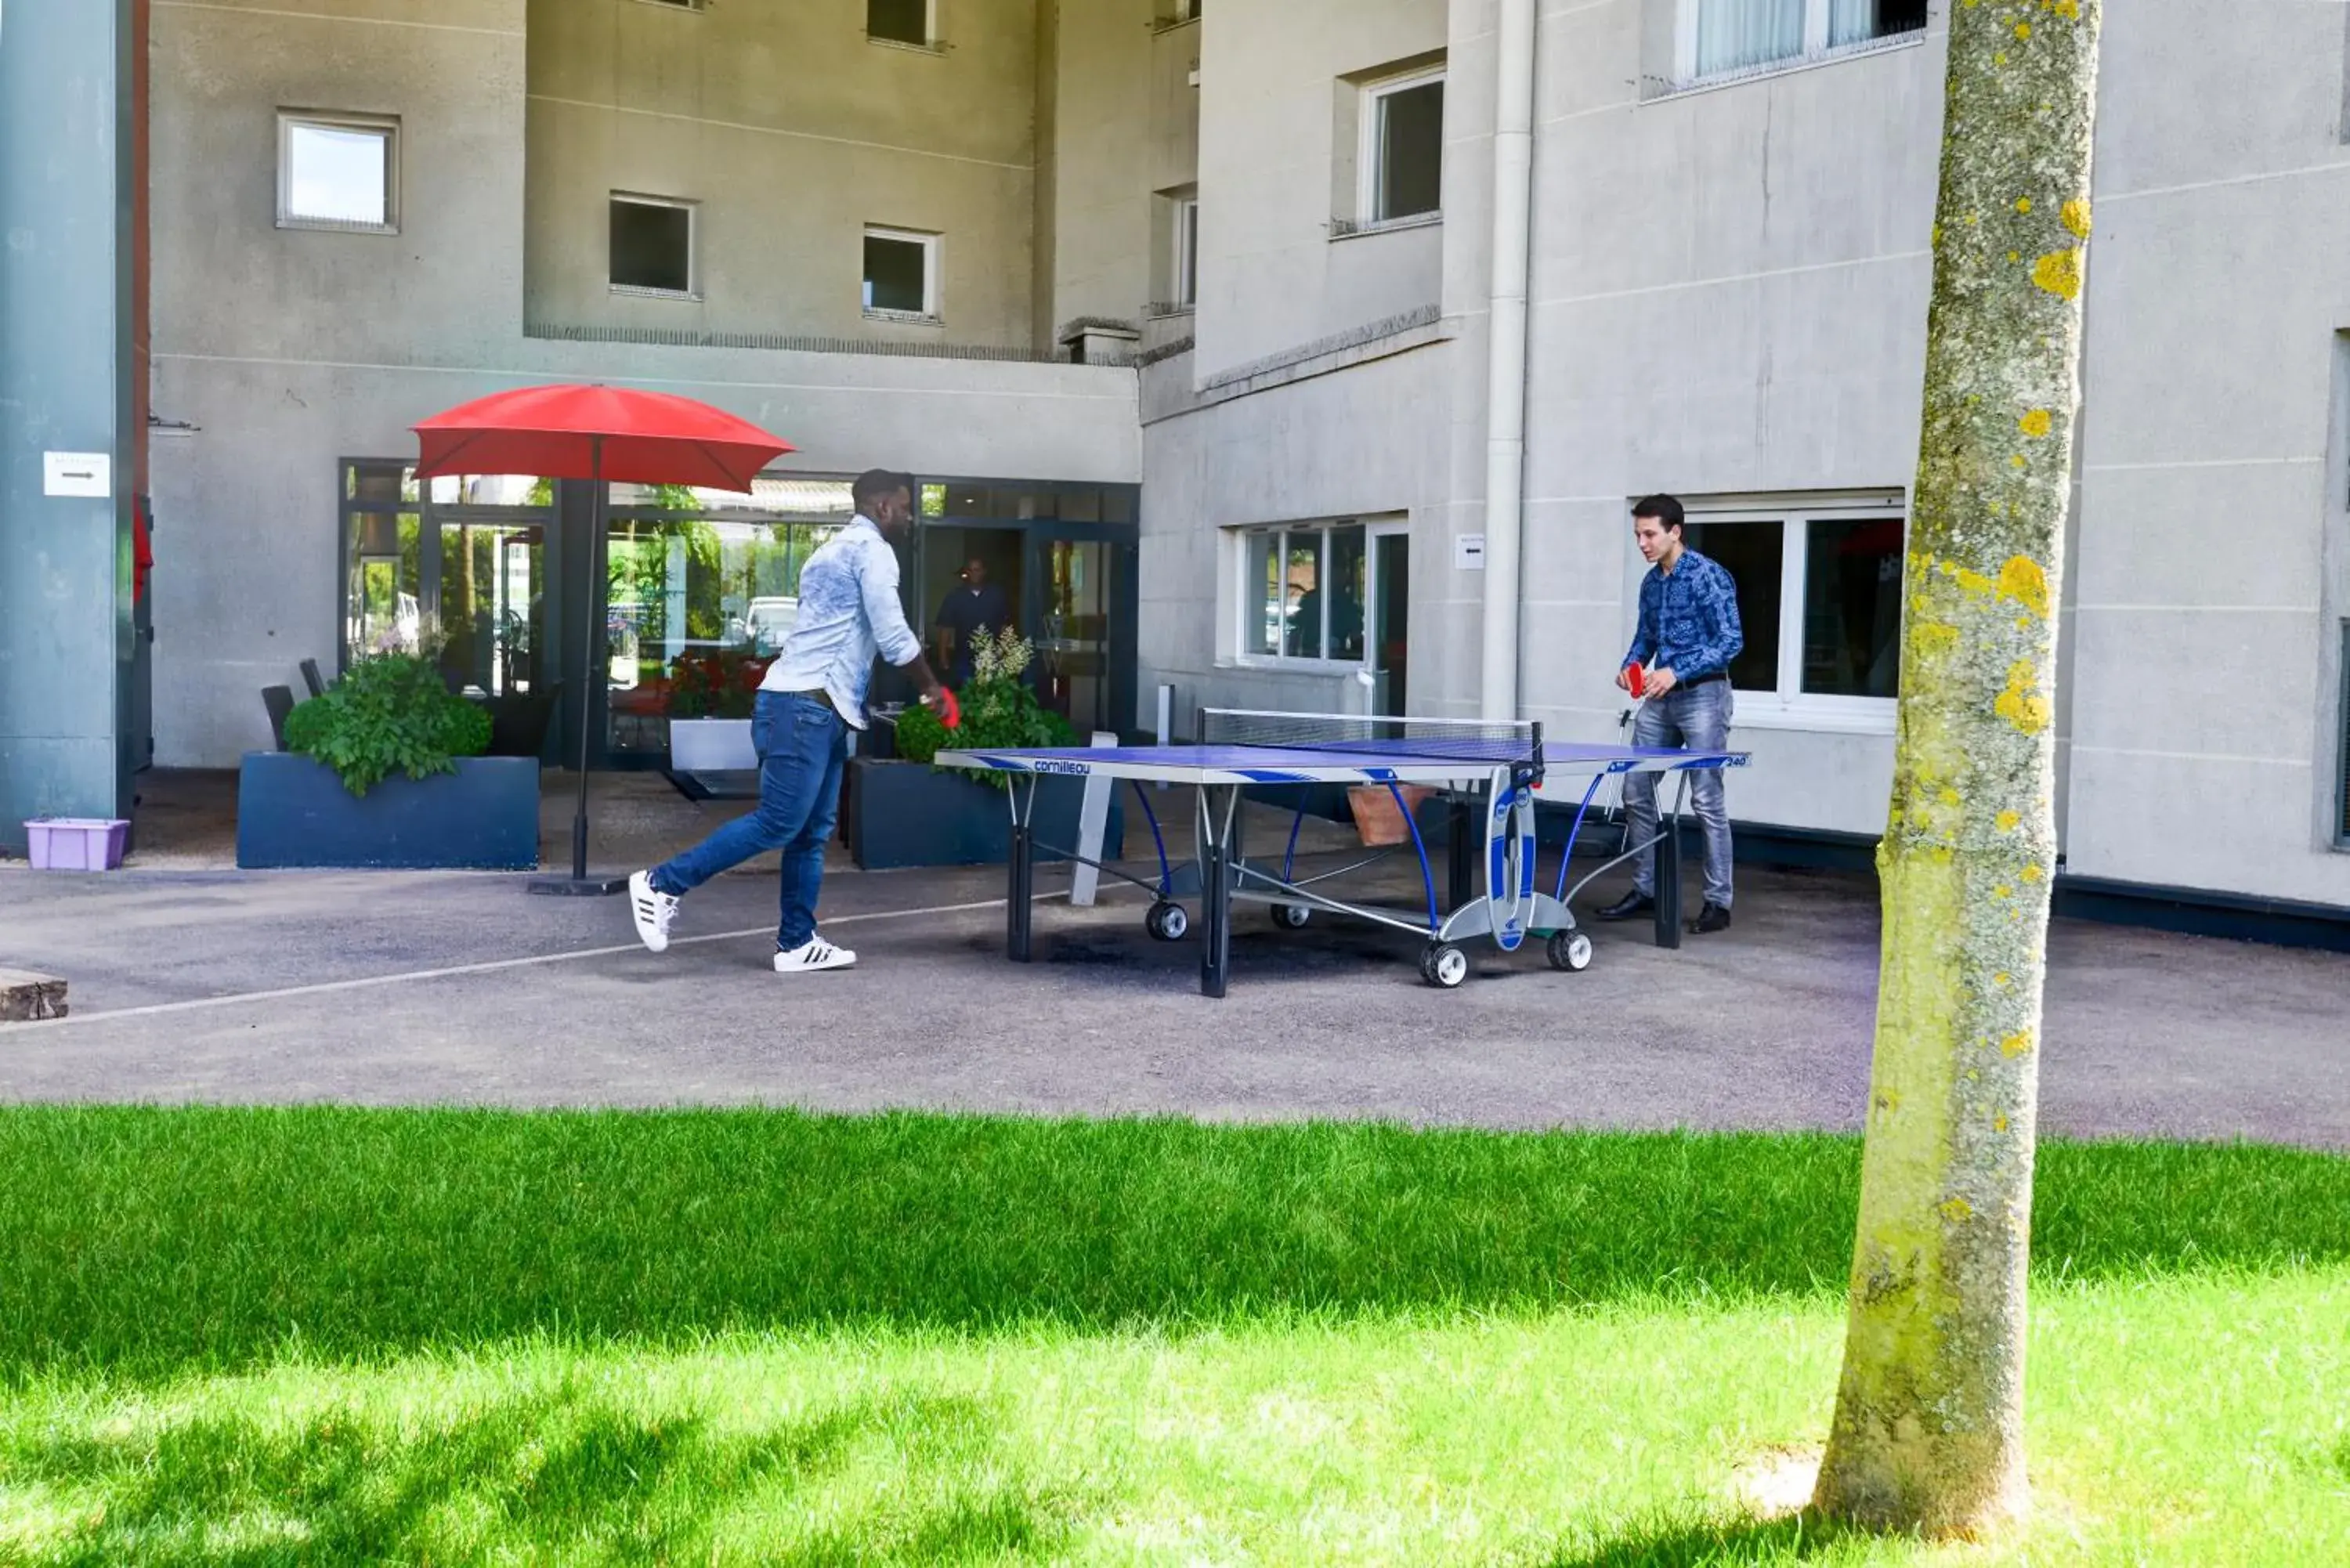 Table Tennis in ibis Orly Chevilly Tram 7